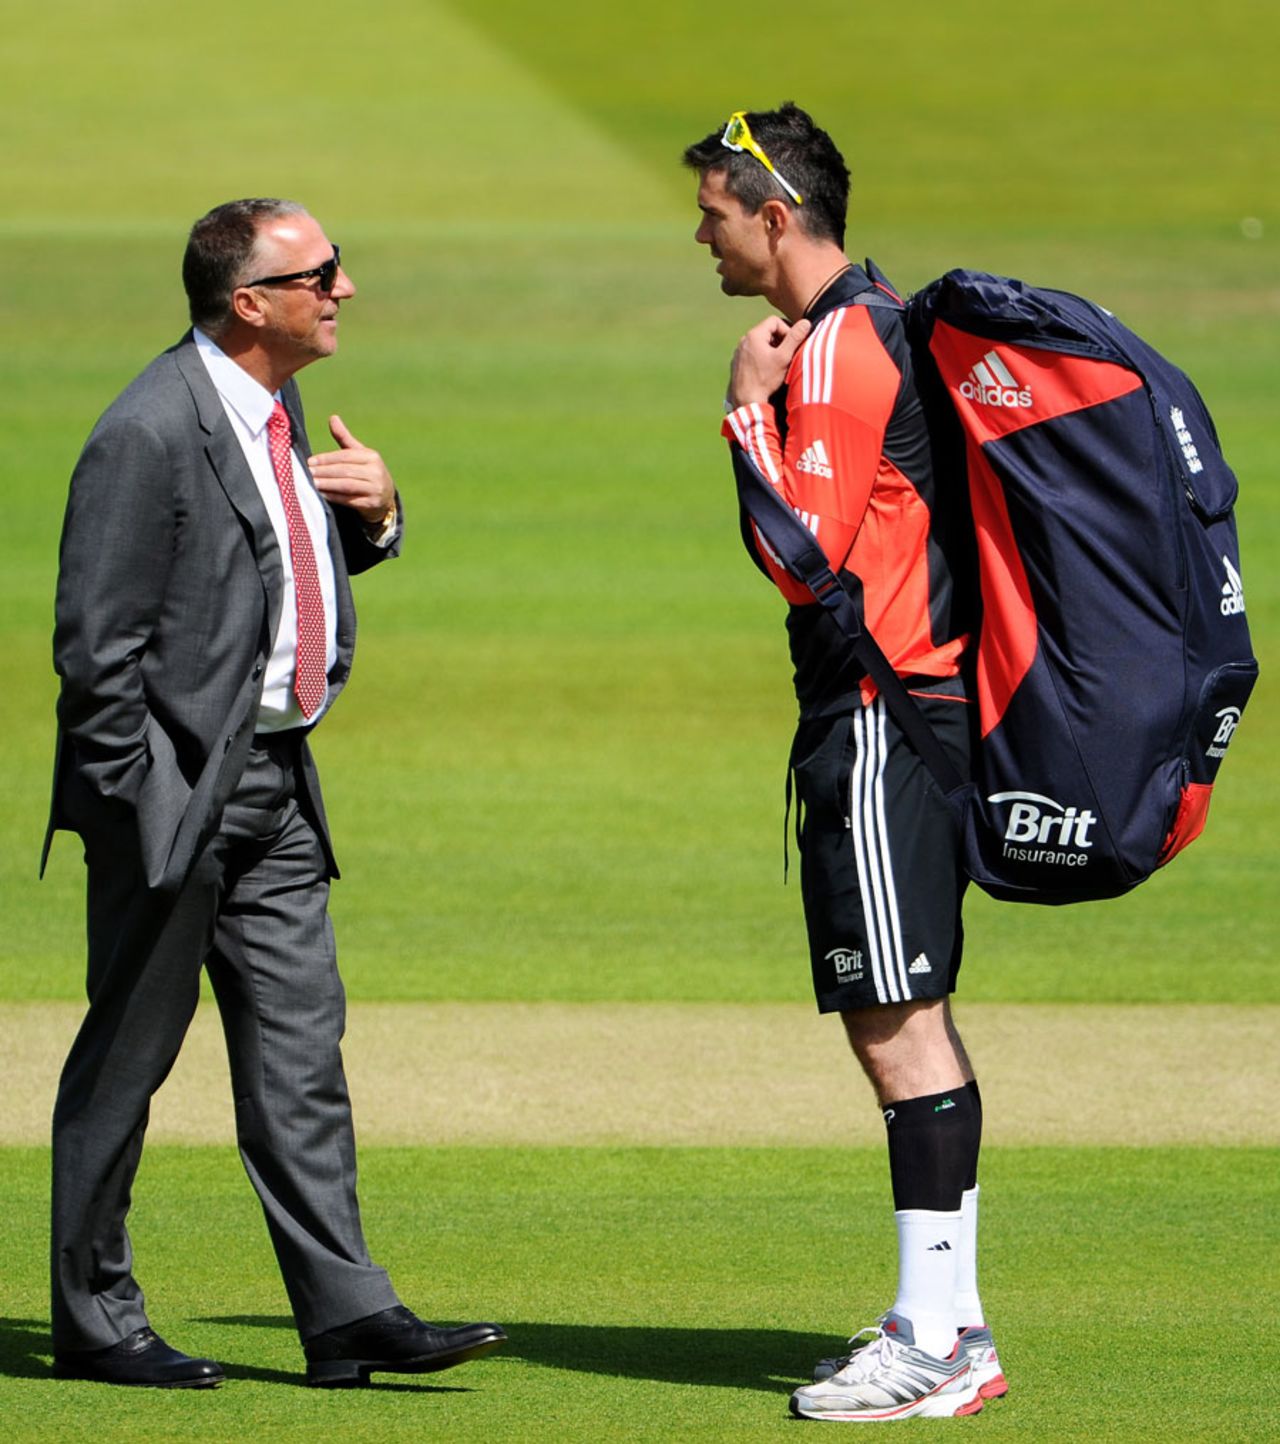 Ian Botham chats with Kevin Pietersen, Lord's, July 3, 2011